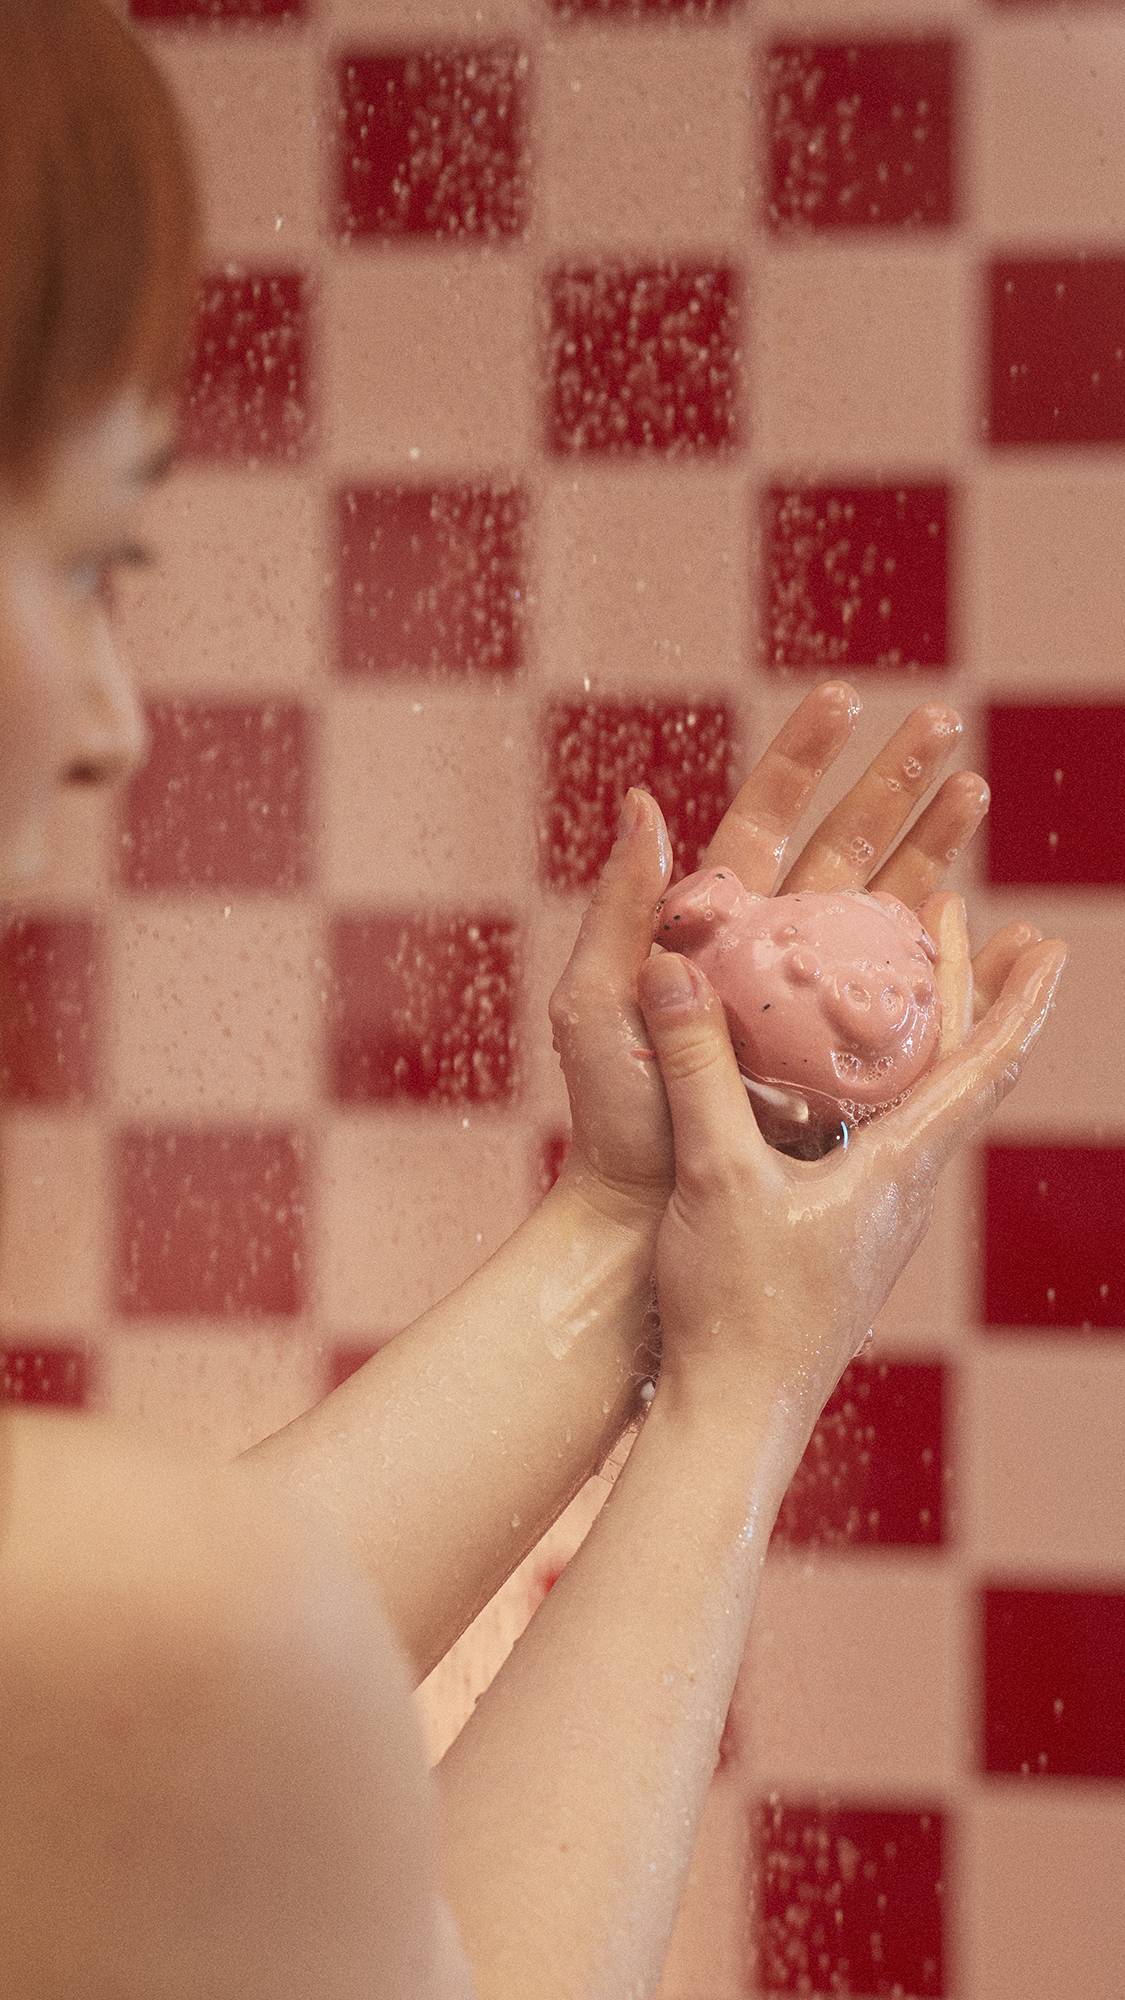 The image shows a close-up of the model's hands as they lather up soapy suds with the My Li'l Chis Piglet soap under running water. 